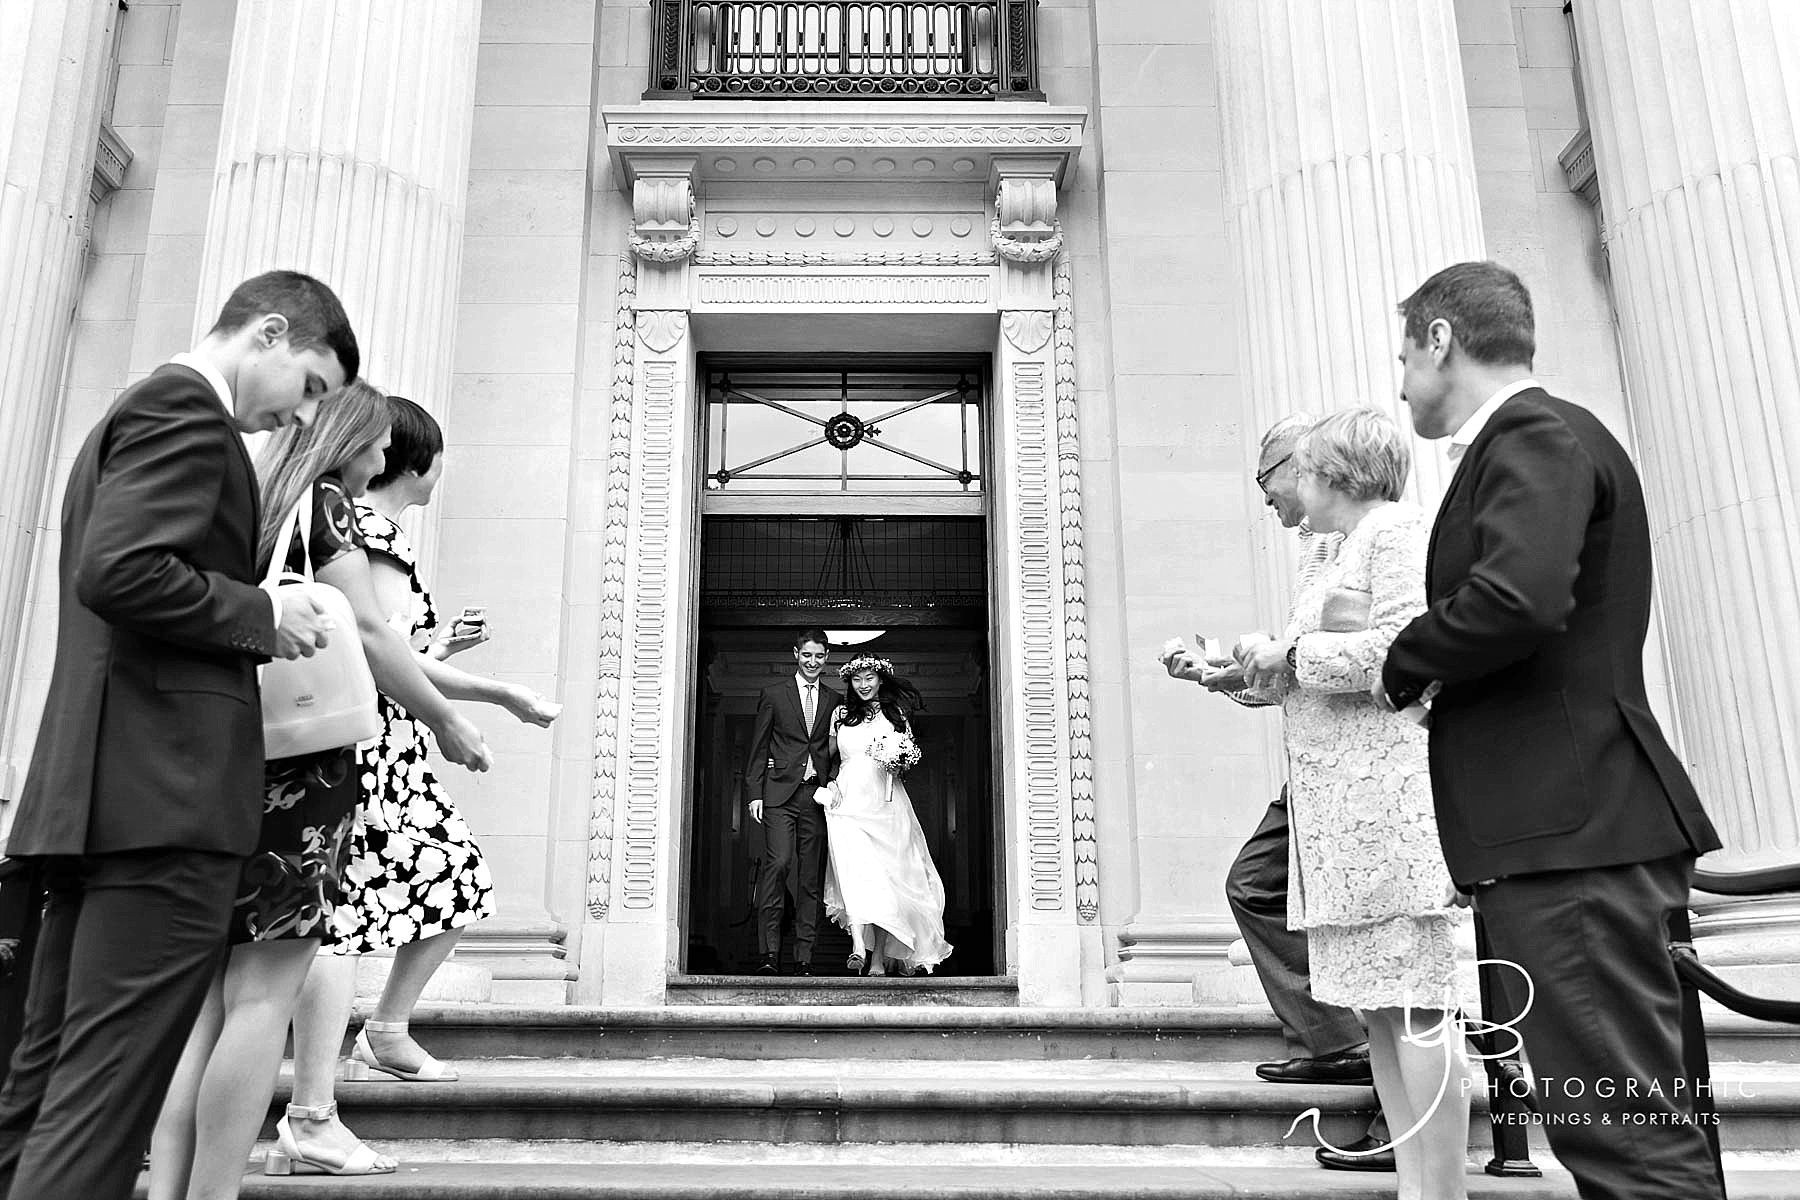 Bride and Groom leave the Old Marylebone Town Hall after their wedding ceremony